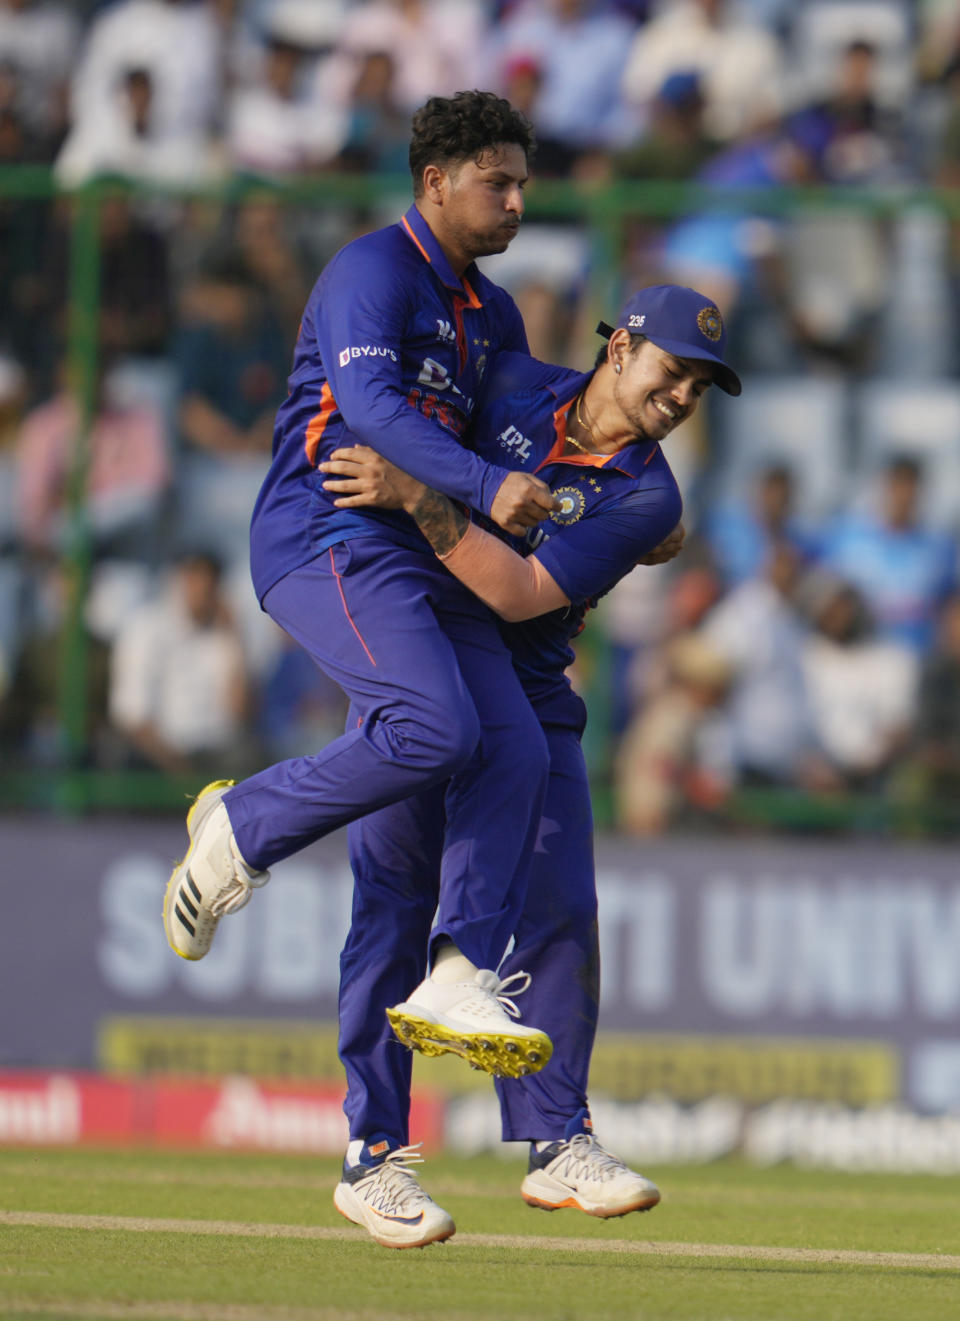 India's Kuldeep Yadav celebrates the wicket of South Africa's Anrich Nortje during the third one day international cricket match between India and South Africa, in New Delhi, India, Tuesday, Oct.11, 2022. (AP Photo/Altaf Qadri)